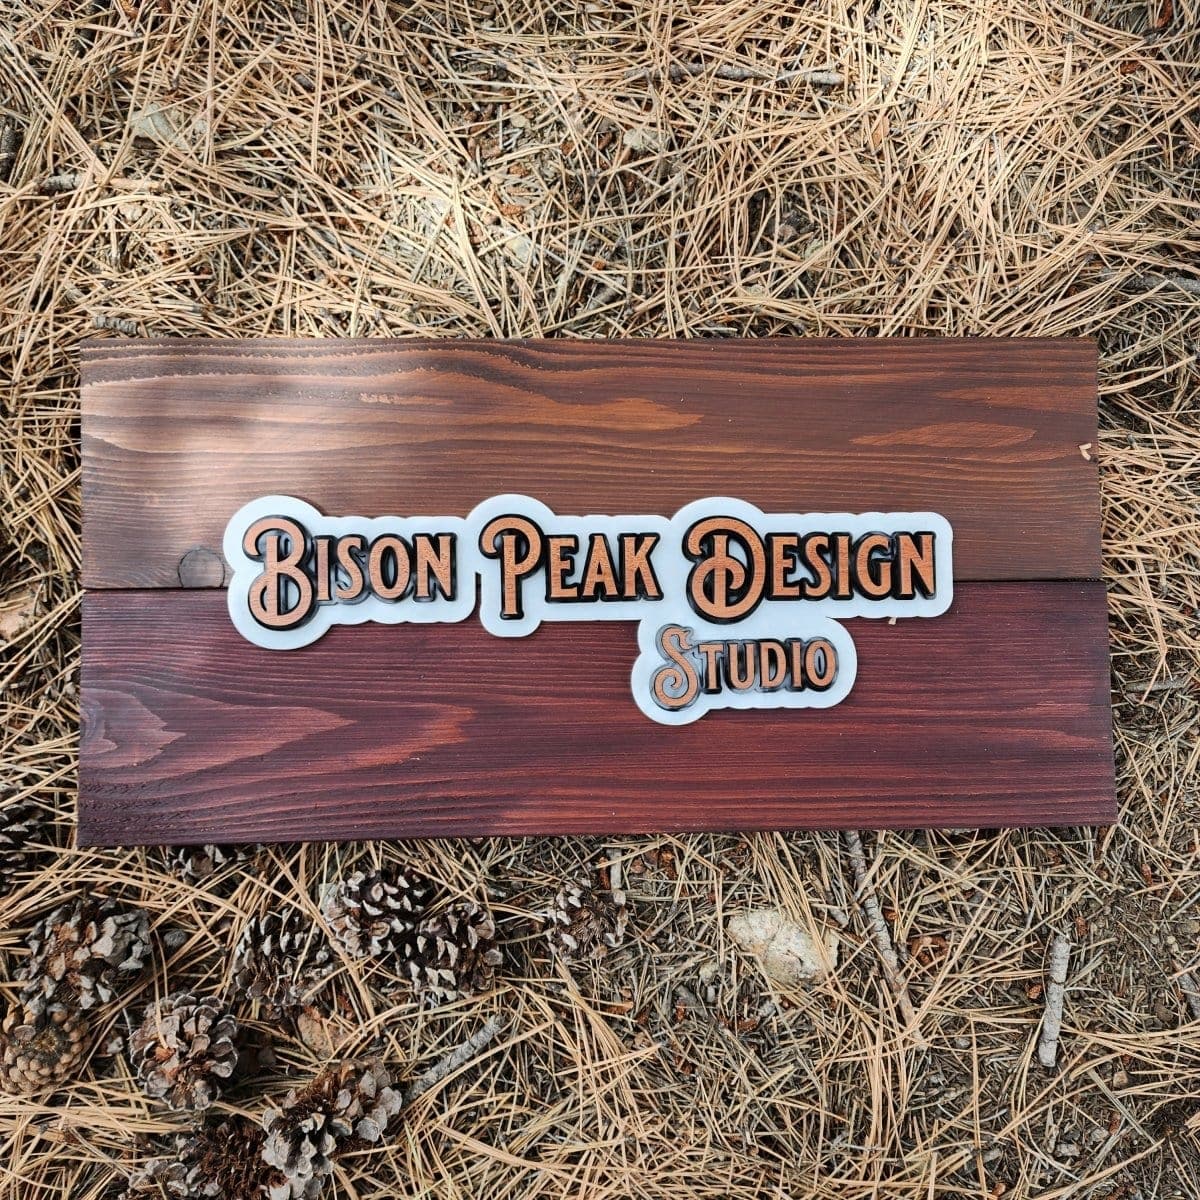 Personalized Signs for Your Office